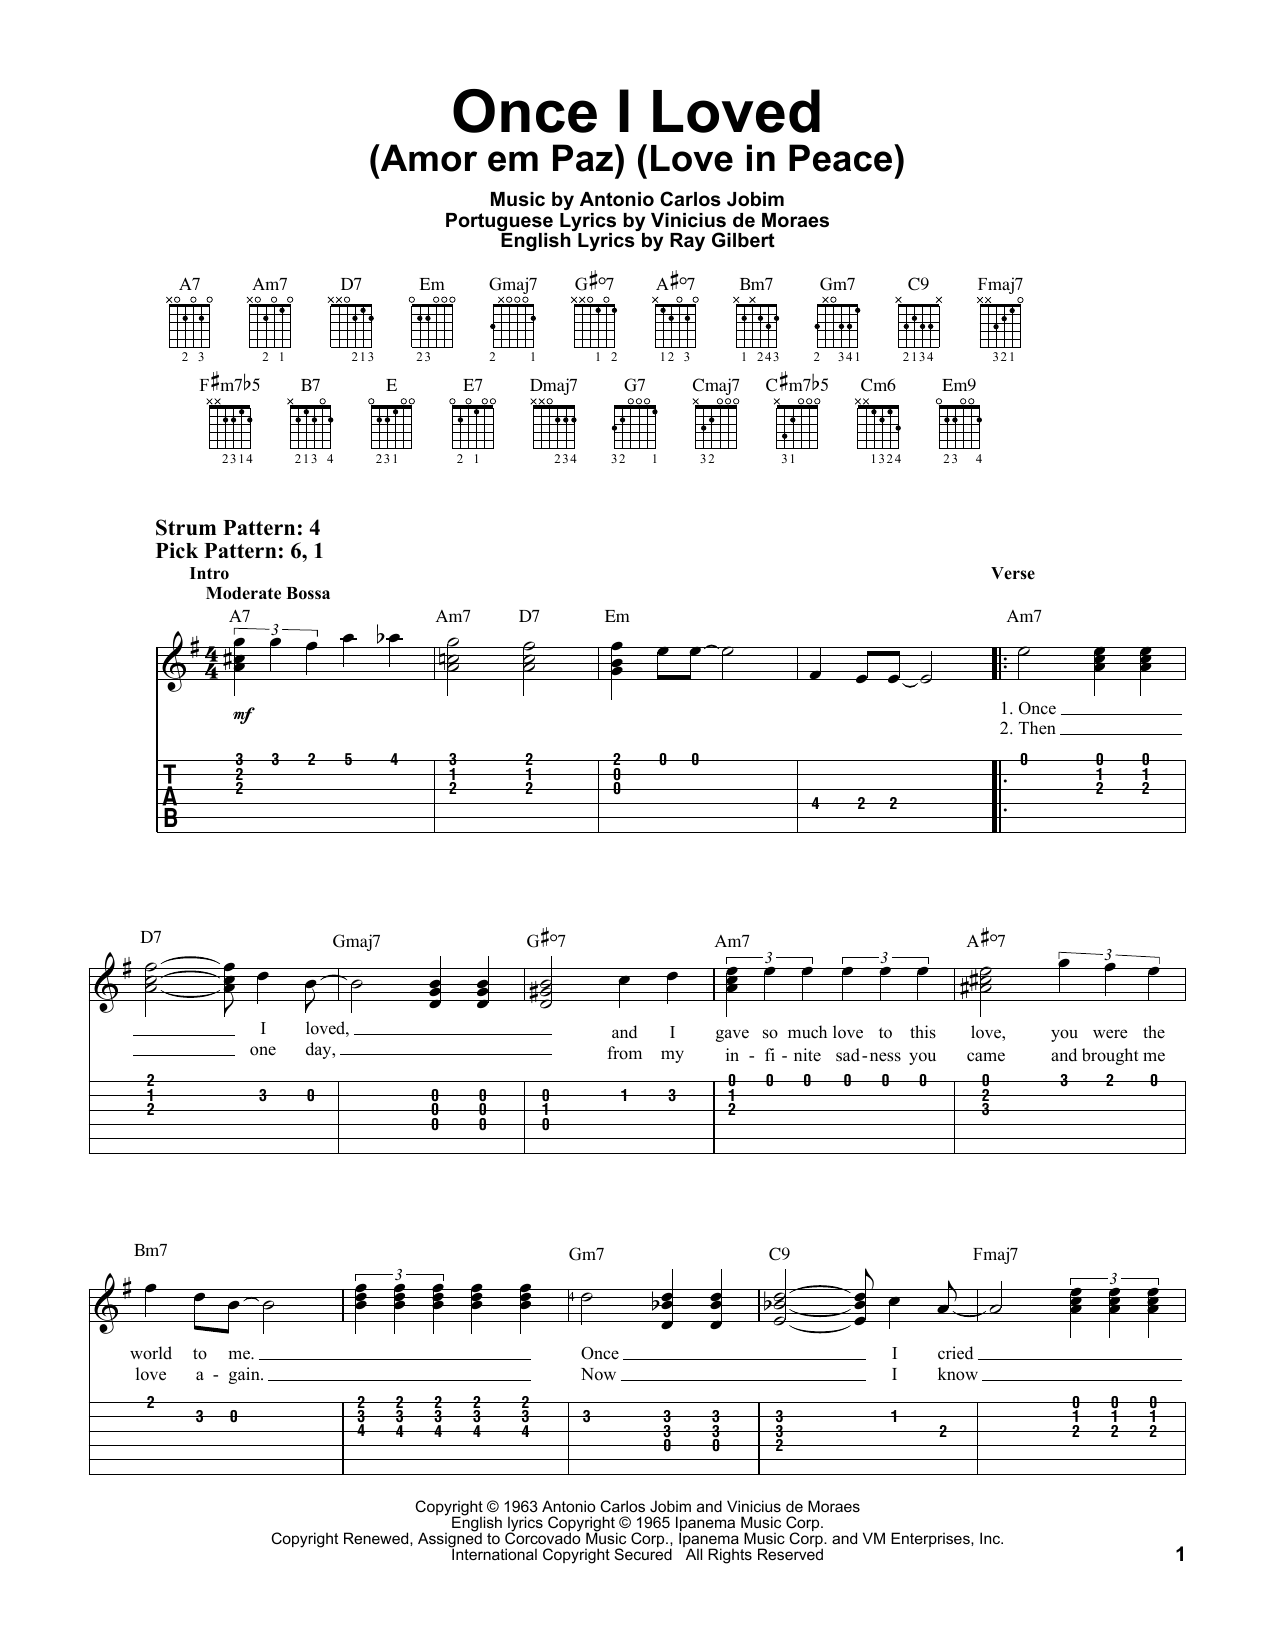 Antonio Carlos Jobim Once I Loved (Amor Em Paz) (Love In Peace) sheet music notes and chords. Download Printable PDF.